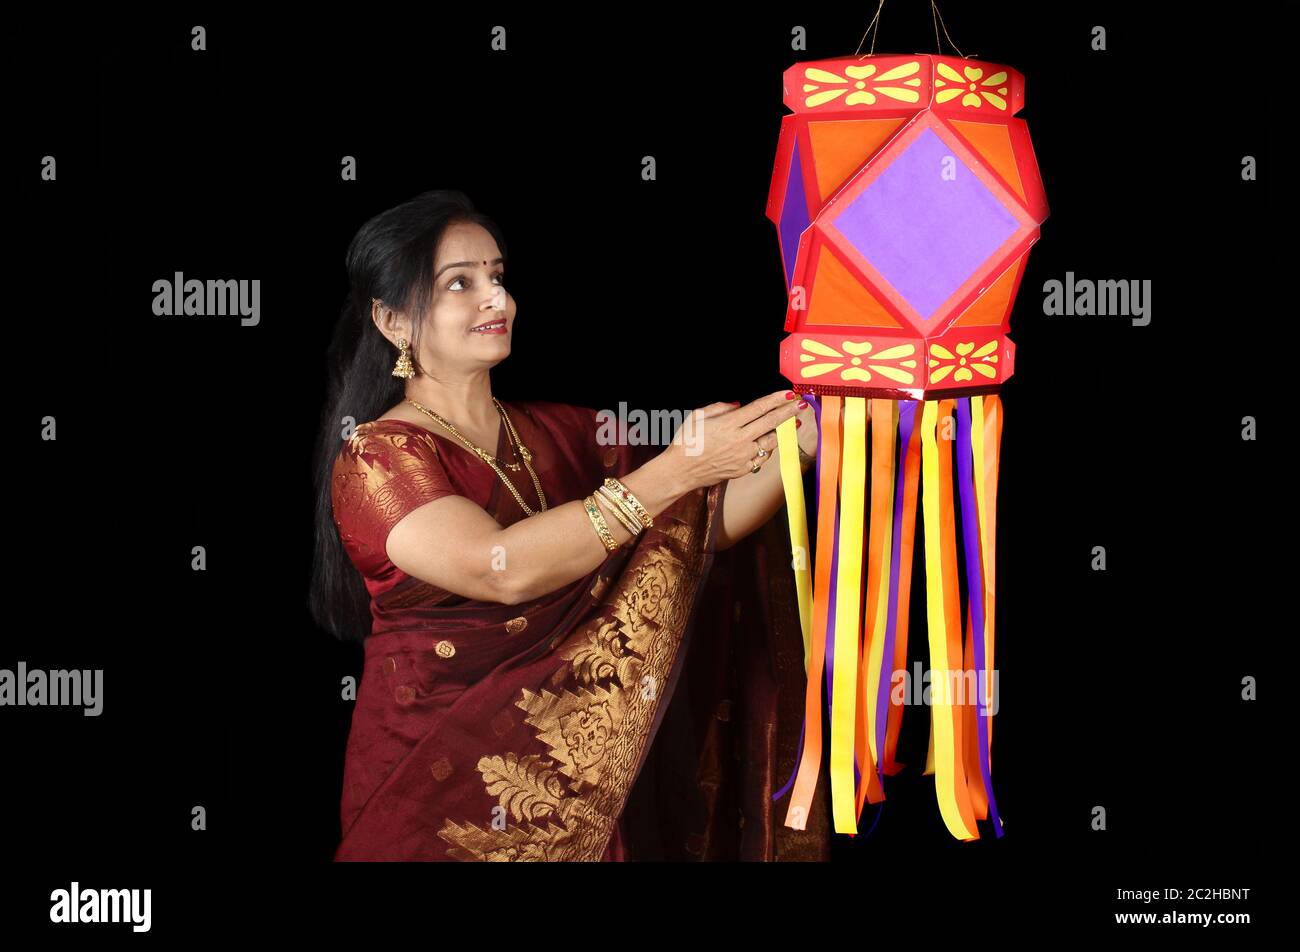 An Indian woman looking at the traditional Diwali lantern during Diwali festival in India, on the backdrop of Diwali fireworks. Stock Photo